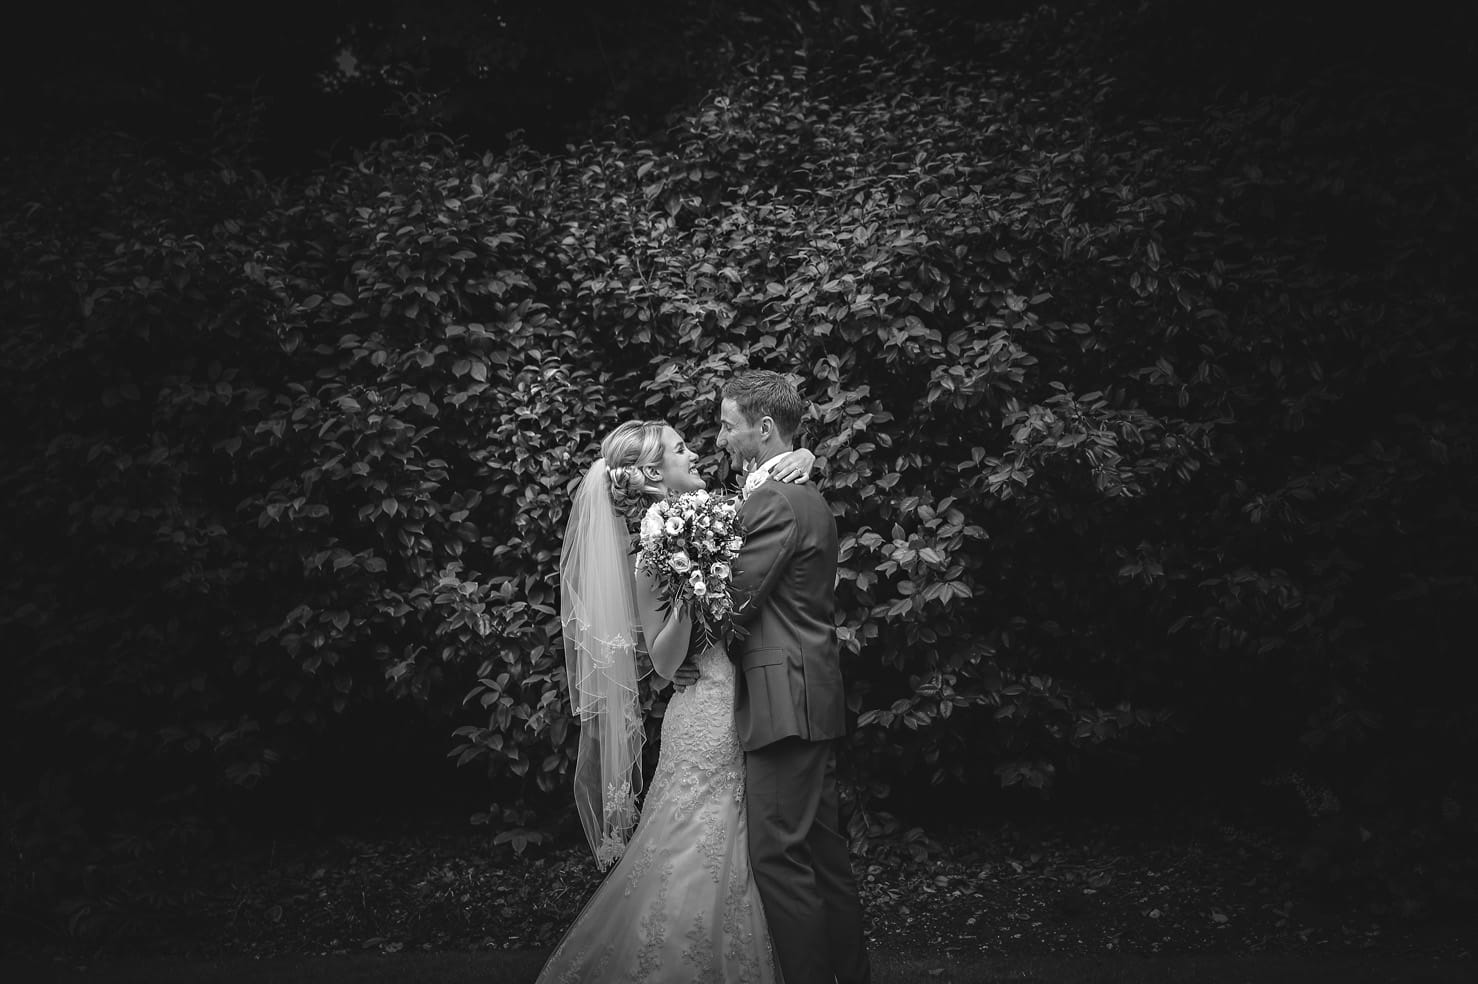 Wedding Portrait of Groom Holding Bride with Bouquet In Front of Bushes in Black and White